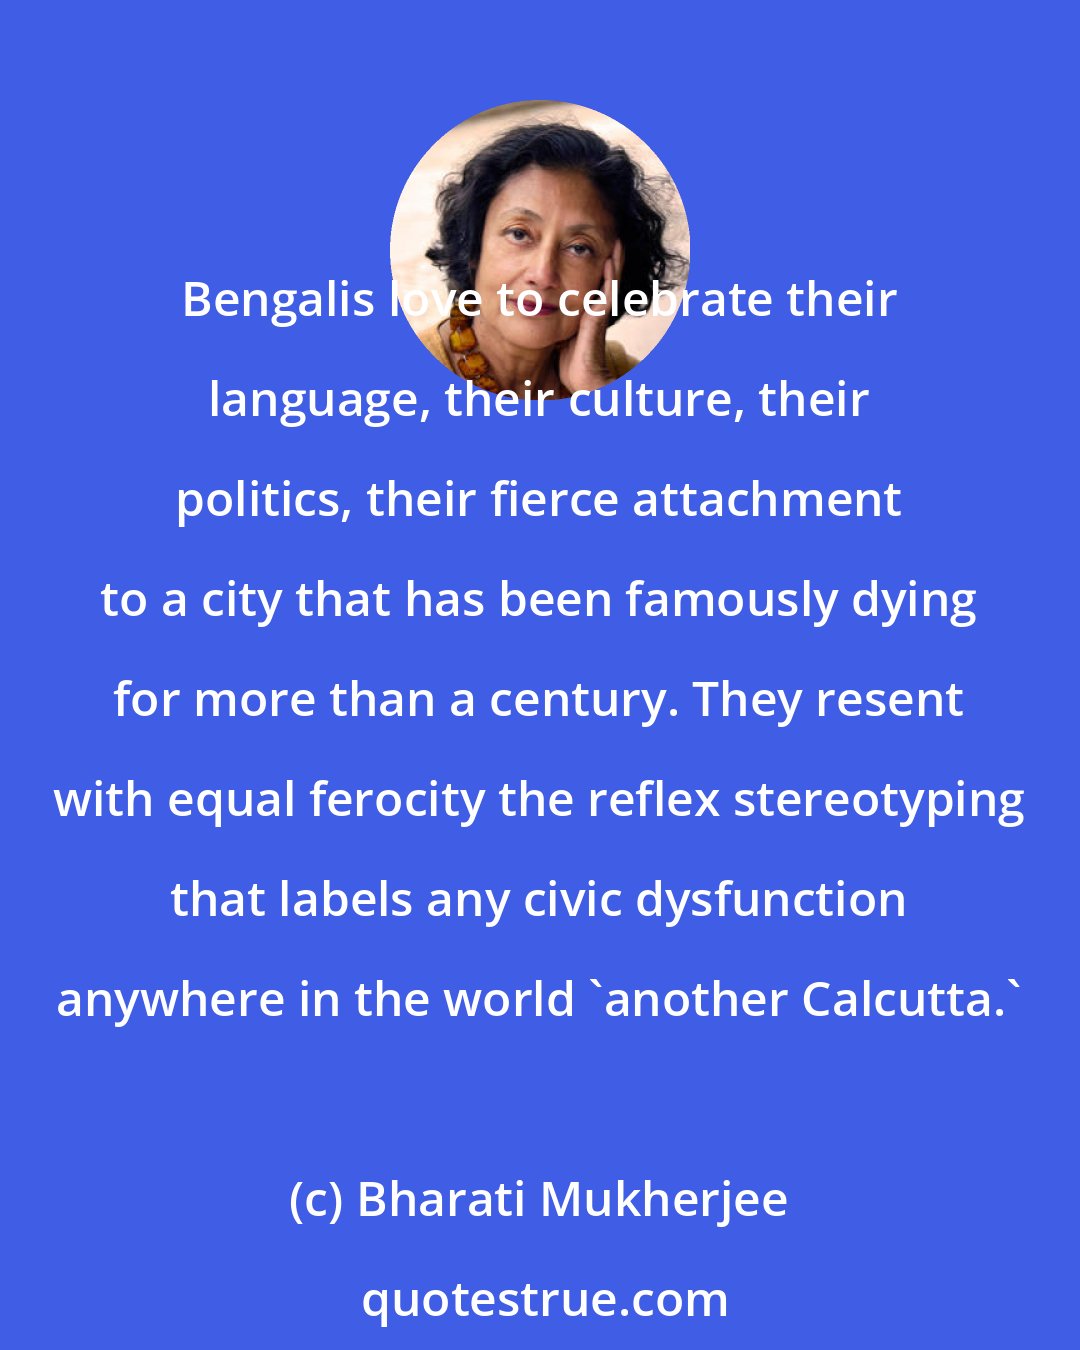 Bharati Mukherjee: Bengalis love to celebrate their language, their culture, their politics, their fierce attachment to a city that has been famously dying for more than a century. They resent with equal ferocity the reflex stereotyping that labels any civic dysfunction anywhere in the world 'another Calcutta.'